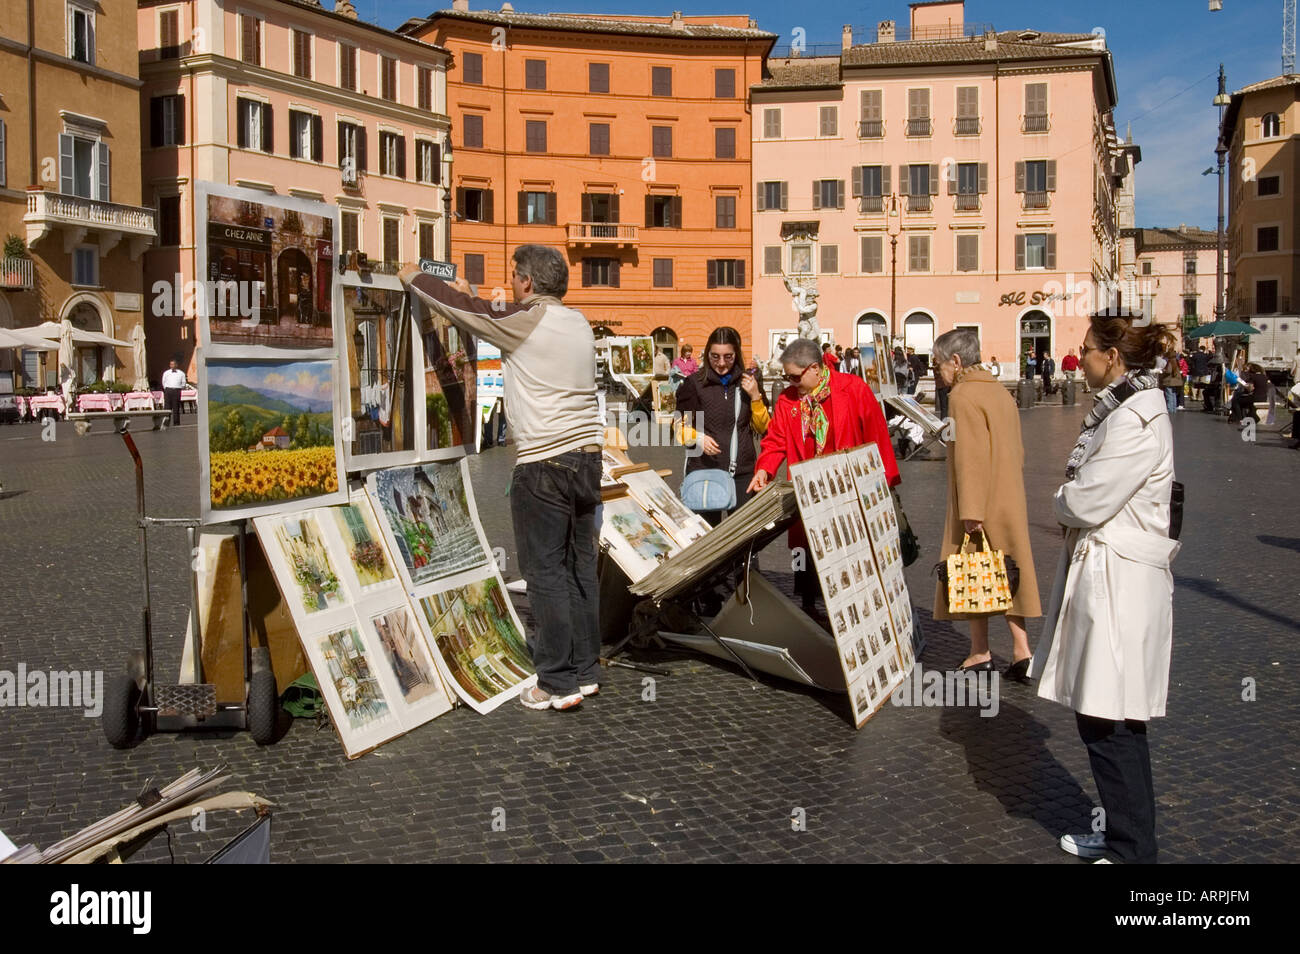 Painting displayed at Piazza Navona, Rome, Italy Stock Photo